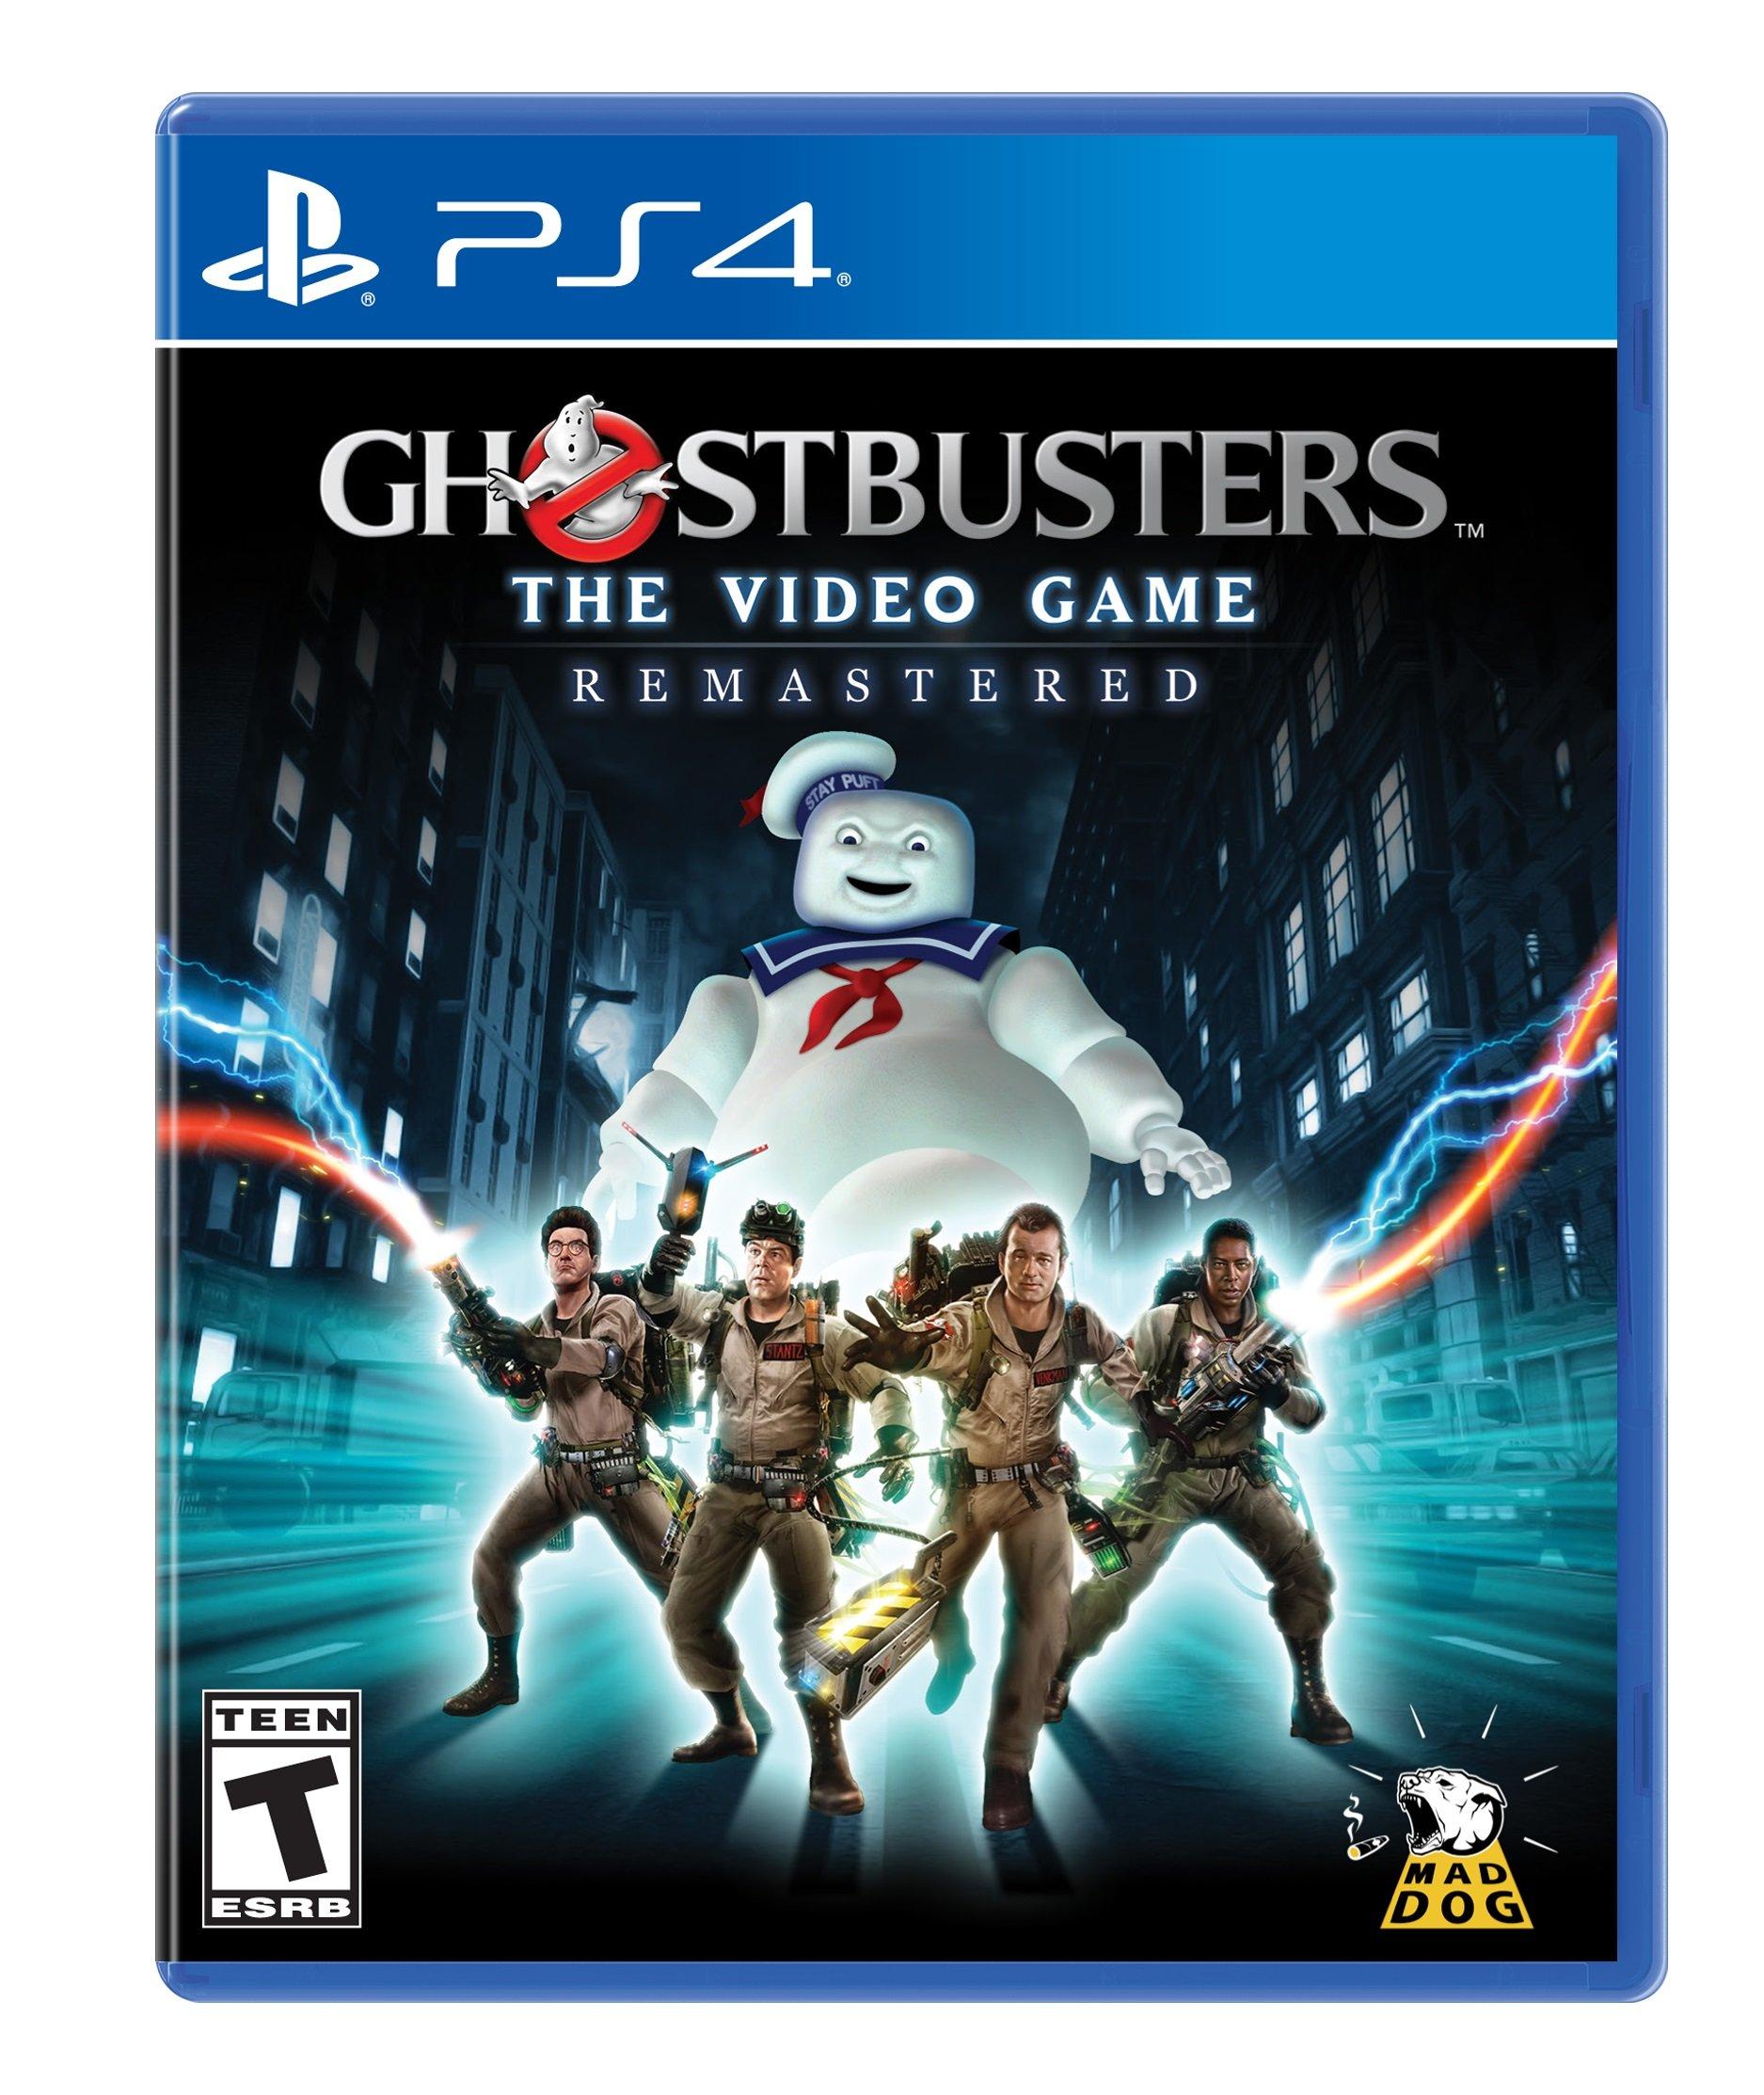 Ghostbusters PC Game Free Download